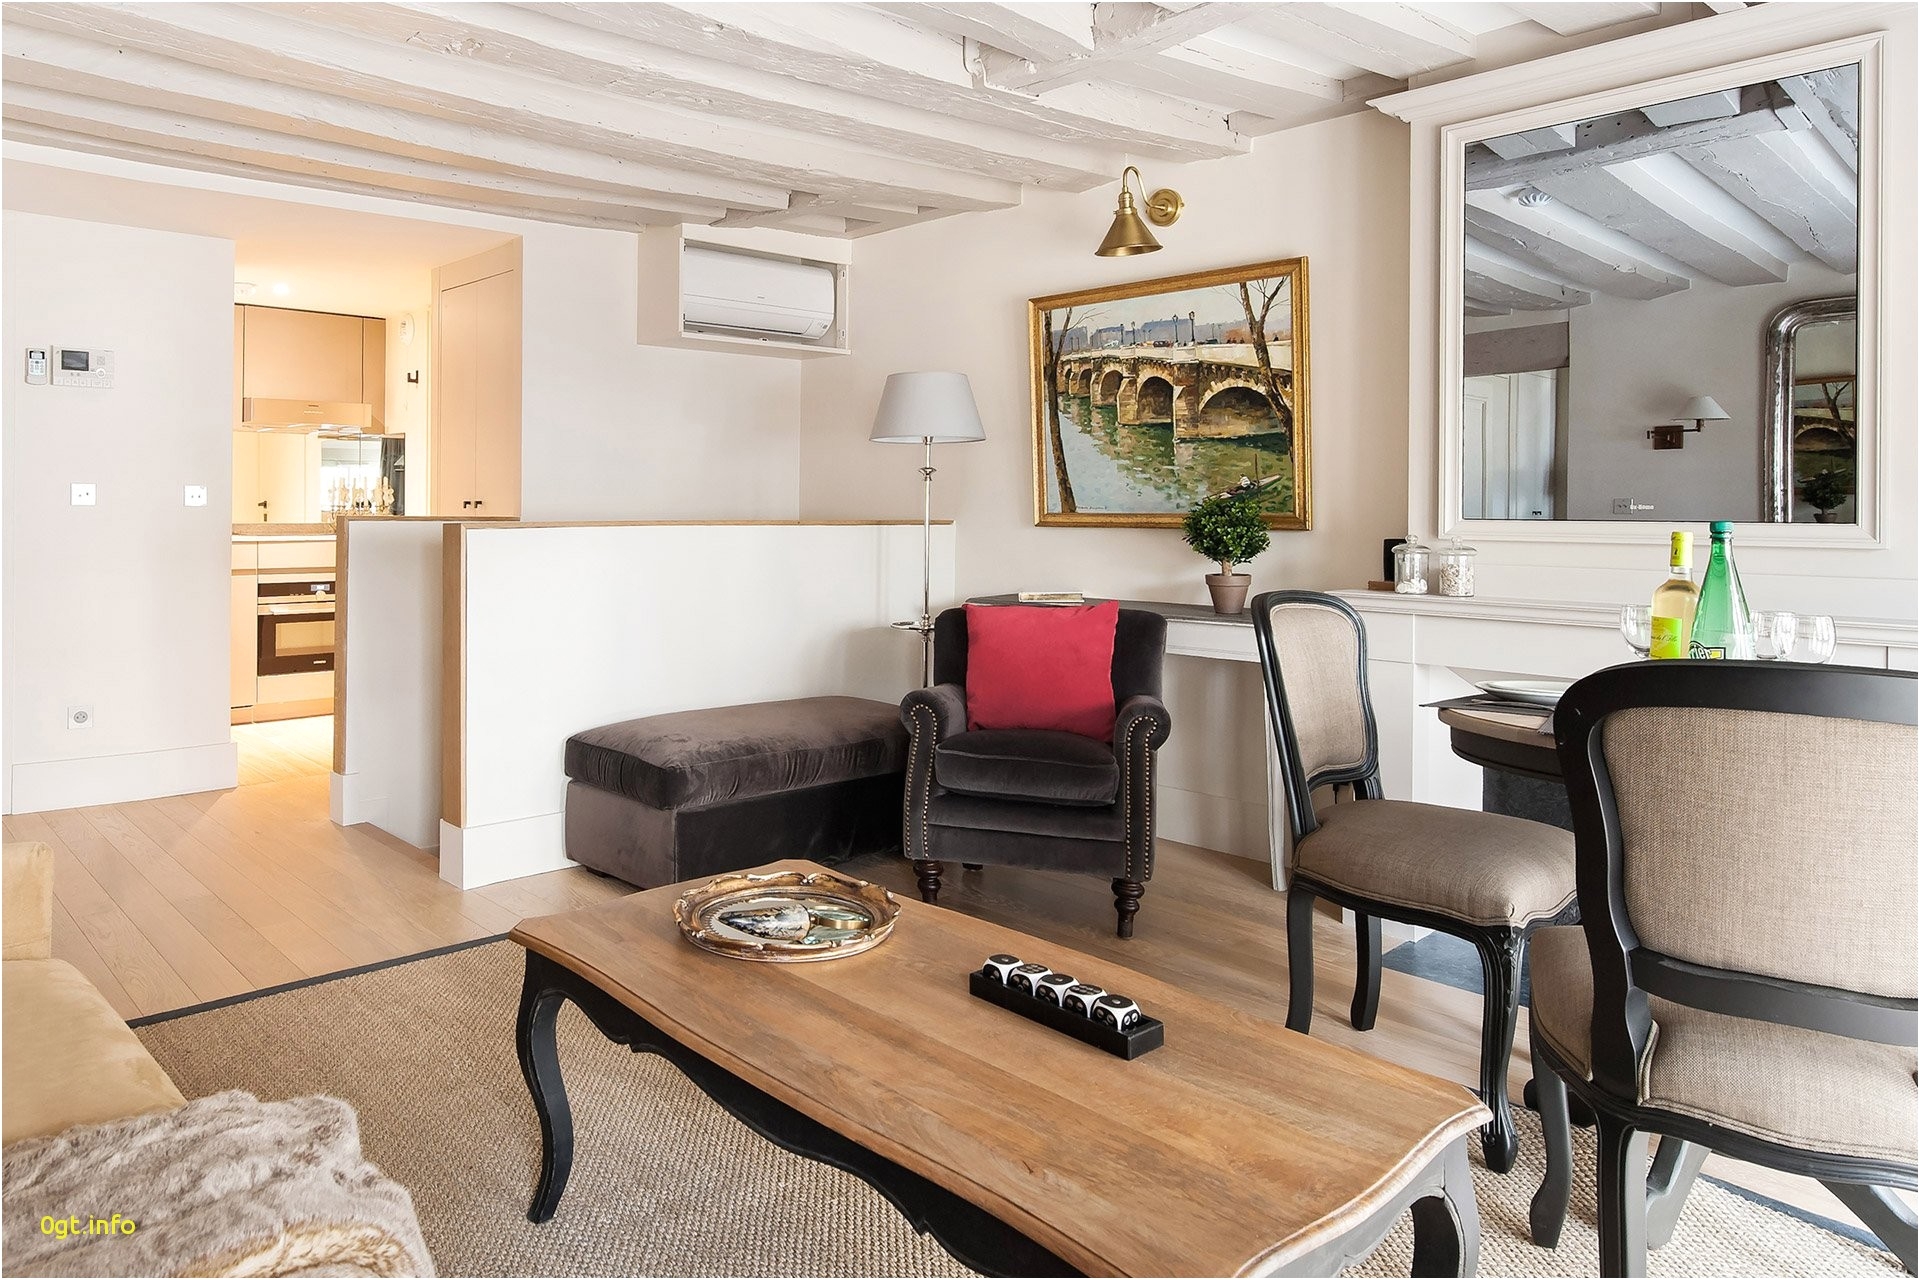 affordable 1 bedroom apartments for rent best of place dauphine two bedroom apartment rental in paris